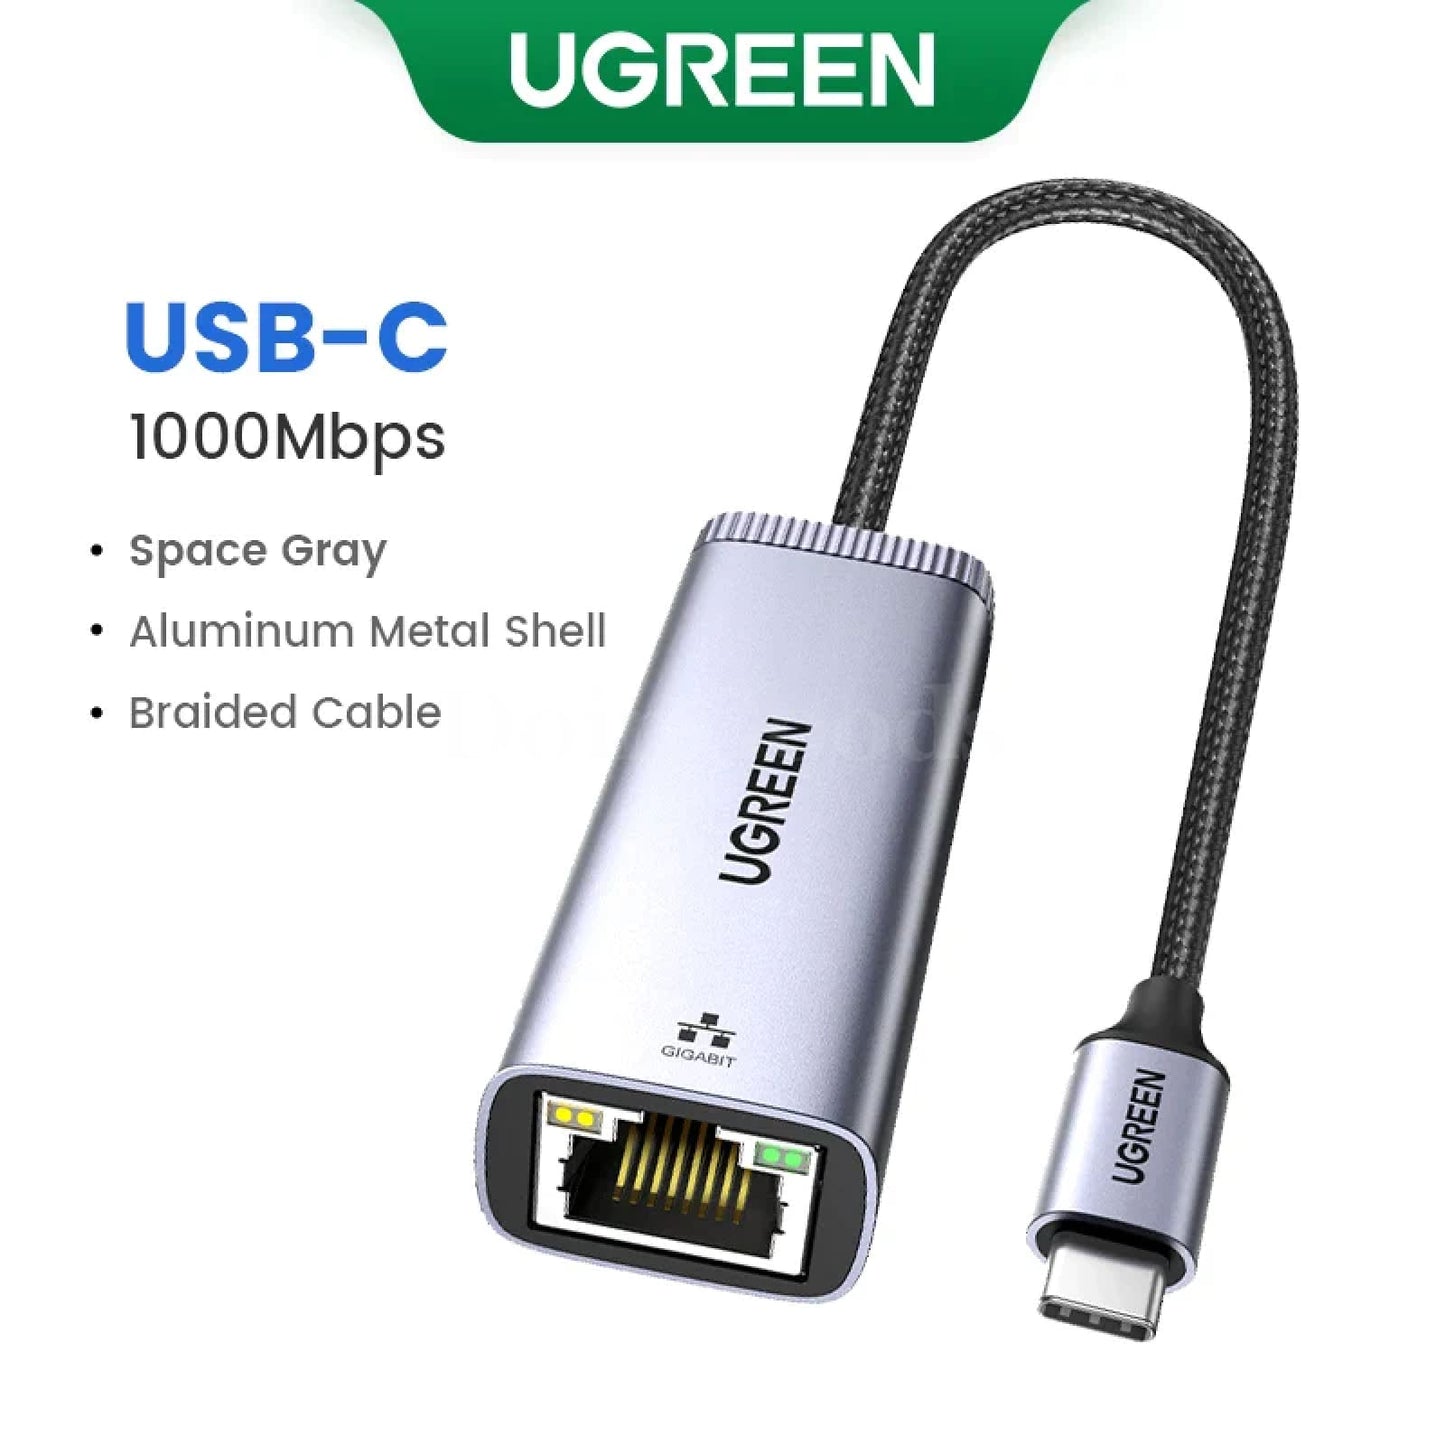 Ugreen Usb C Ethernet Adapter 1000/100Mbps Lan Rj45 For Laptop Macbook Usb-C Braided Cable 301635